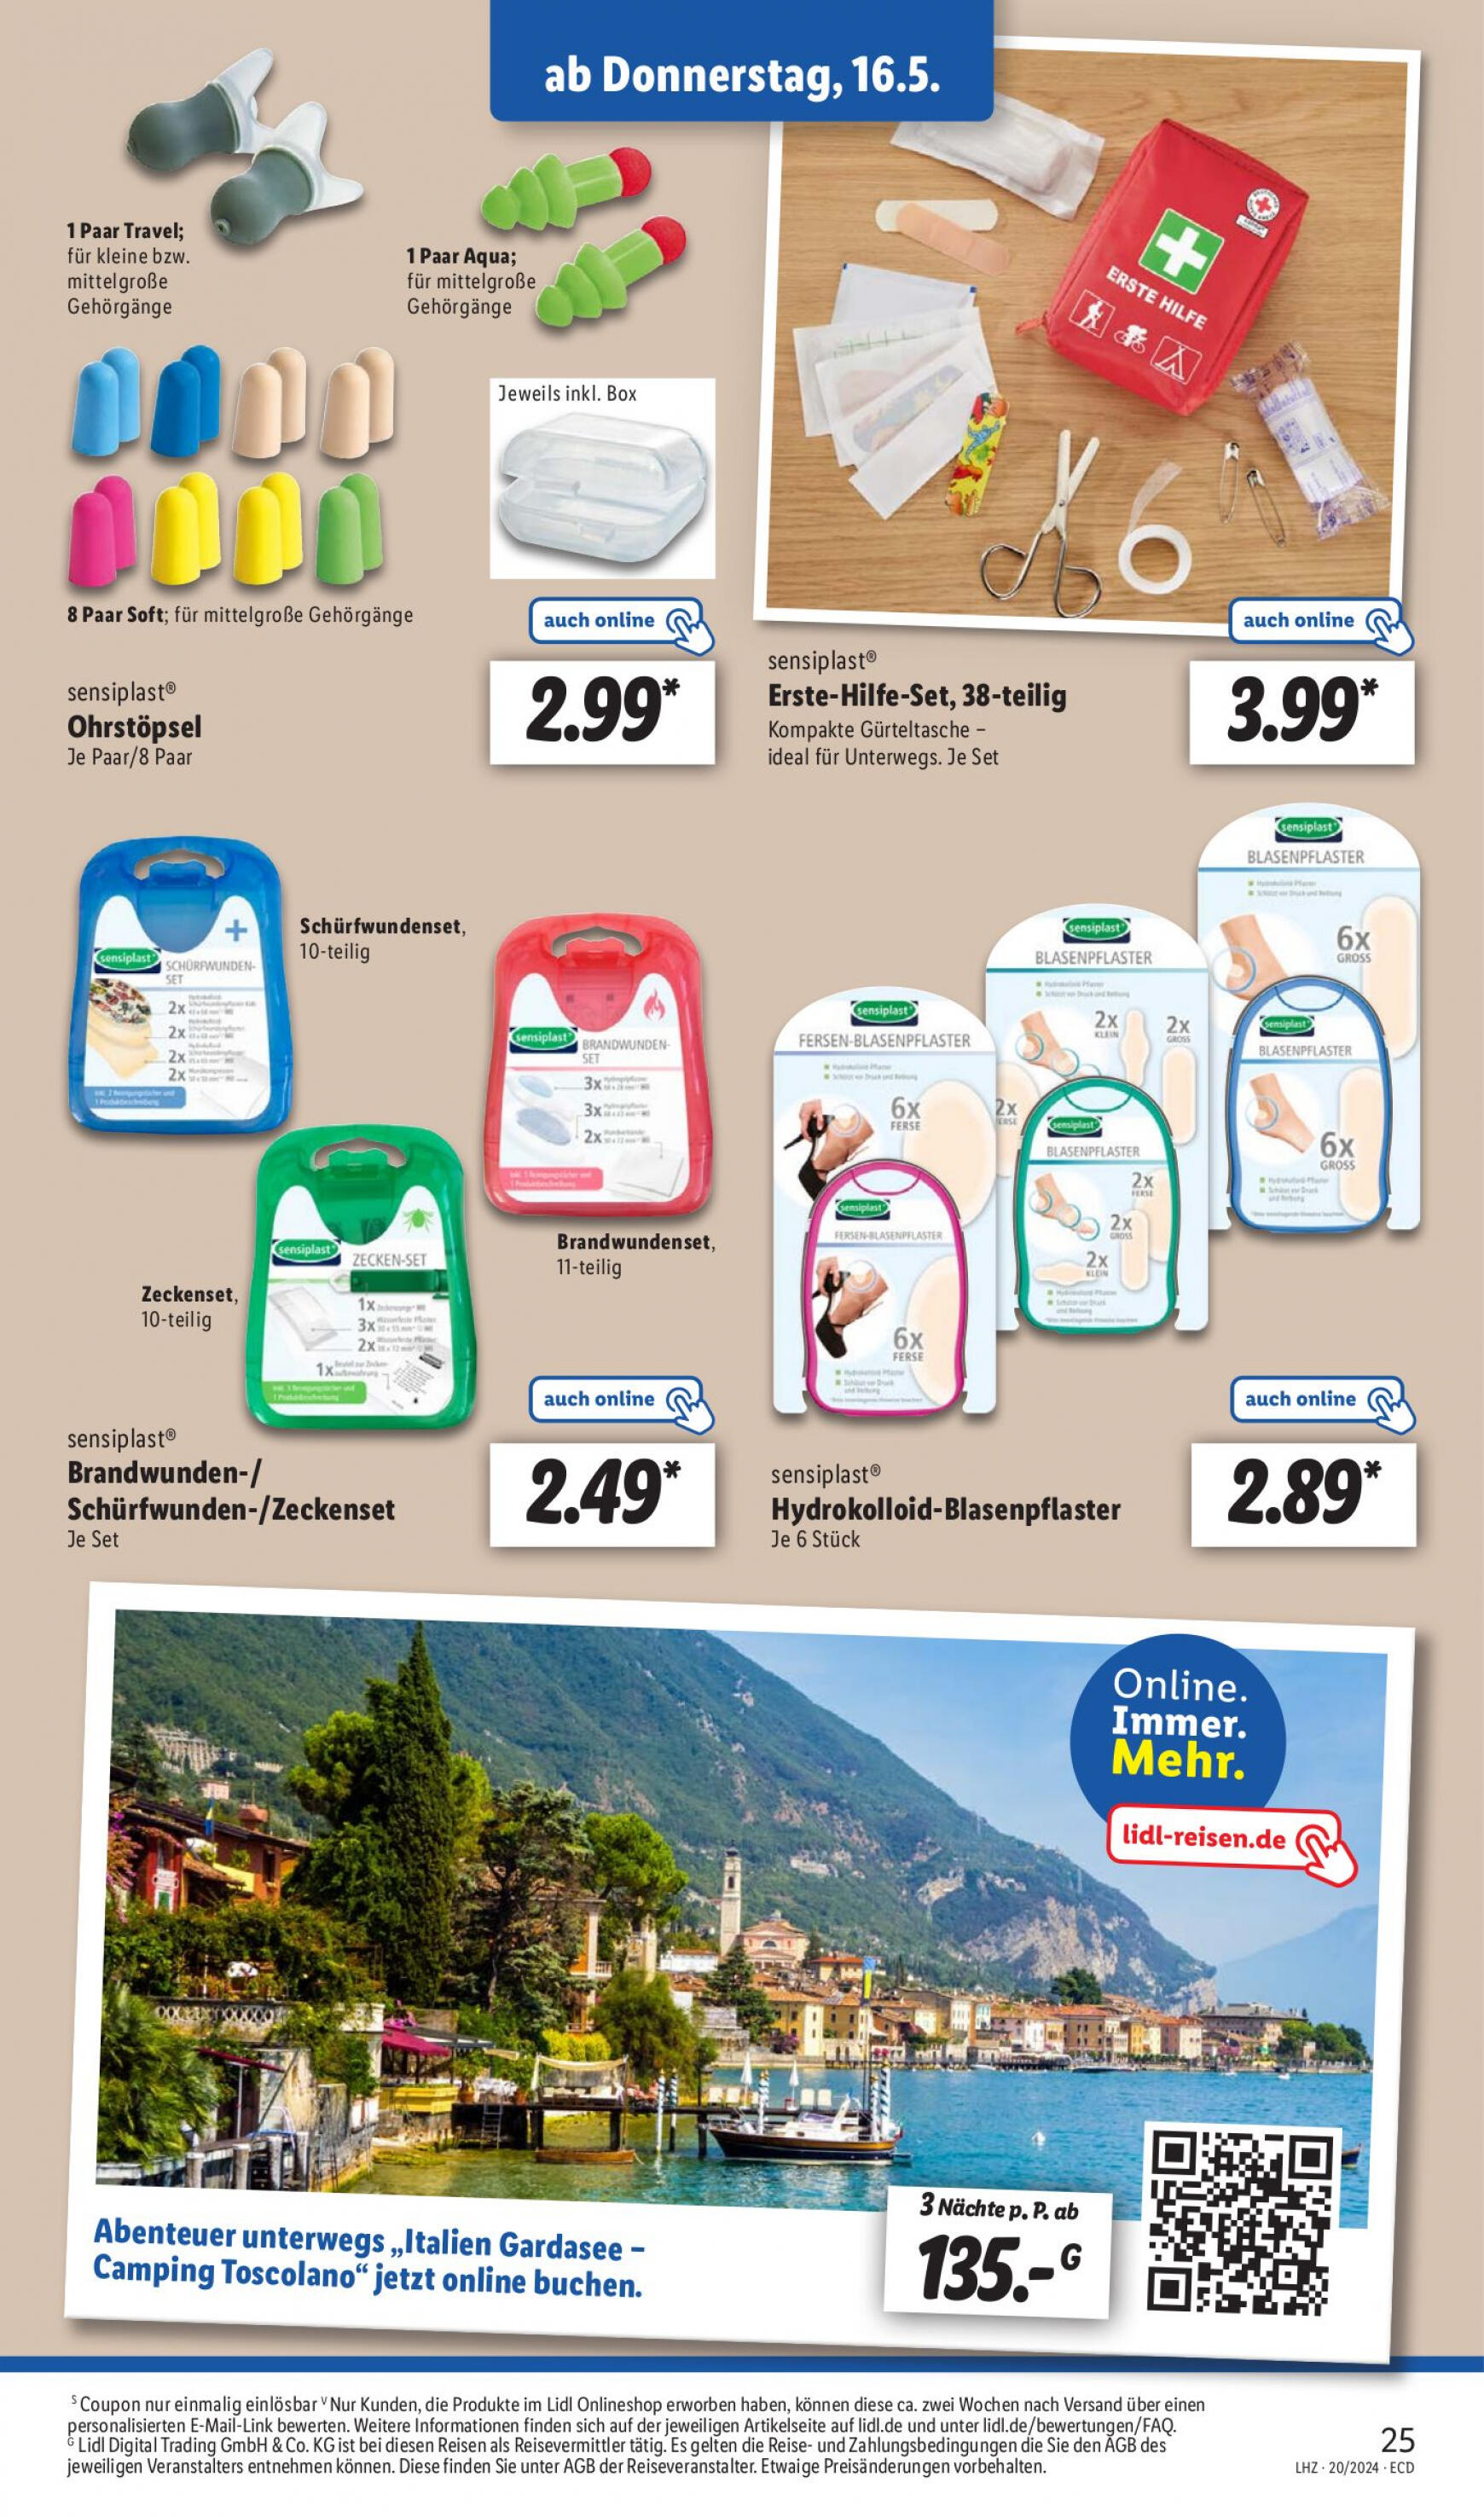 lidl - Flyer Lidl aktuell 13.05. - 18.05. - page: 29